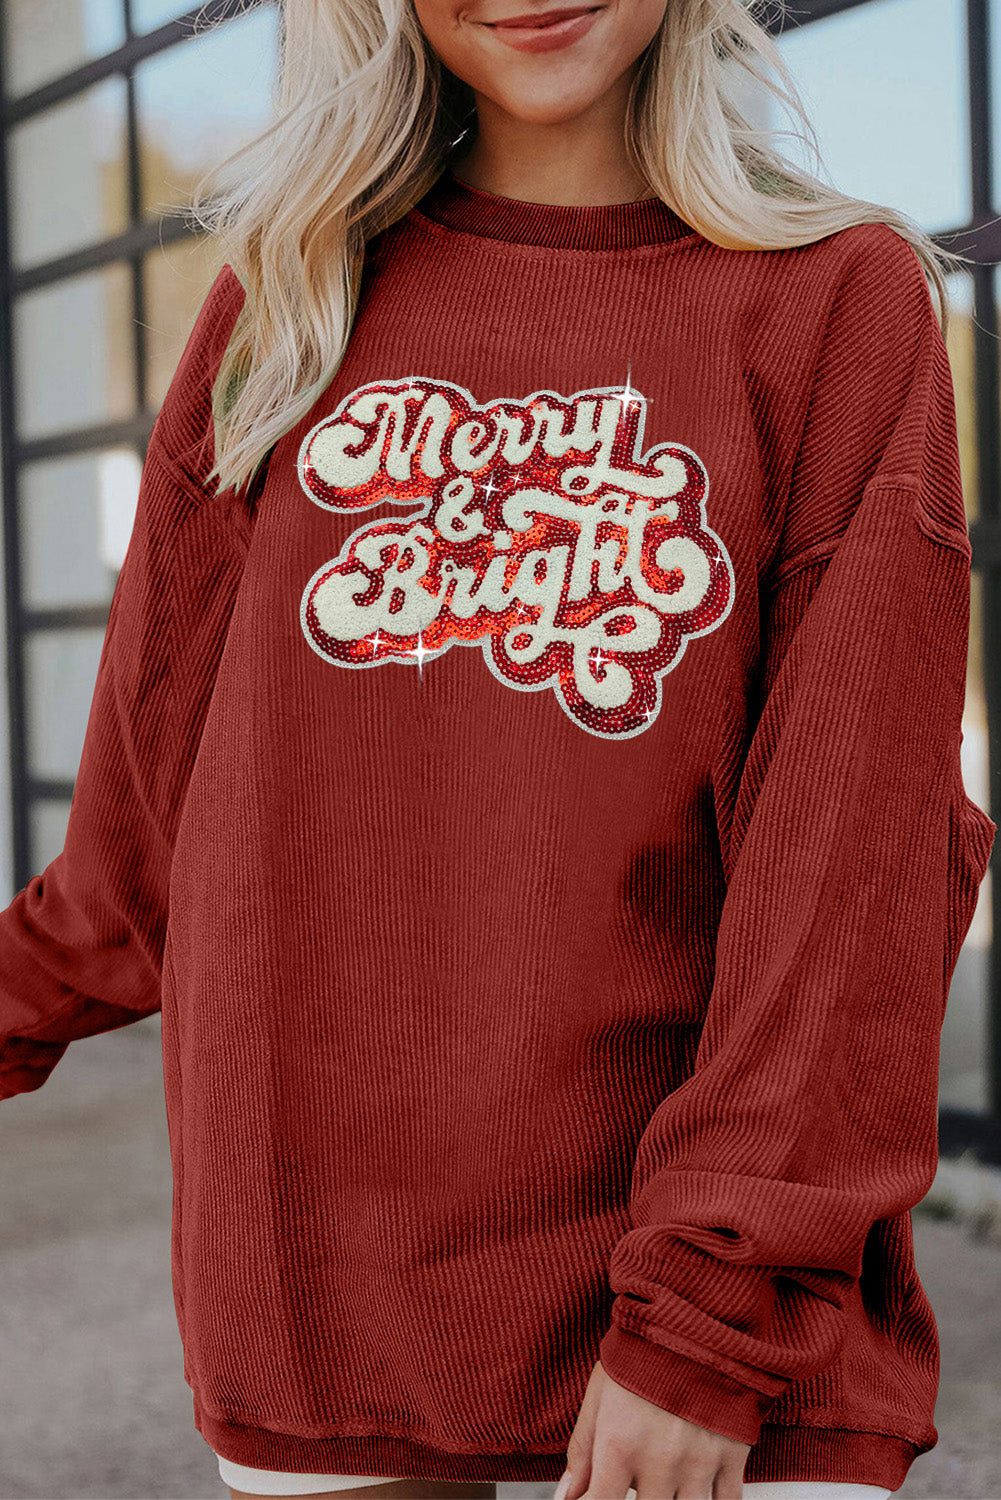 Racing Red Merry & Bright Sequin Ribbed Crew Neck Sweatshirt Racing Red 100%Polyester Graphic Sweatshirts JT's Designer Fashion